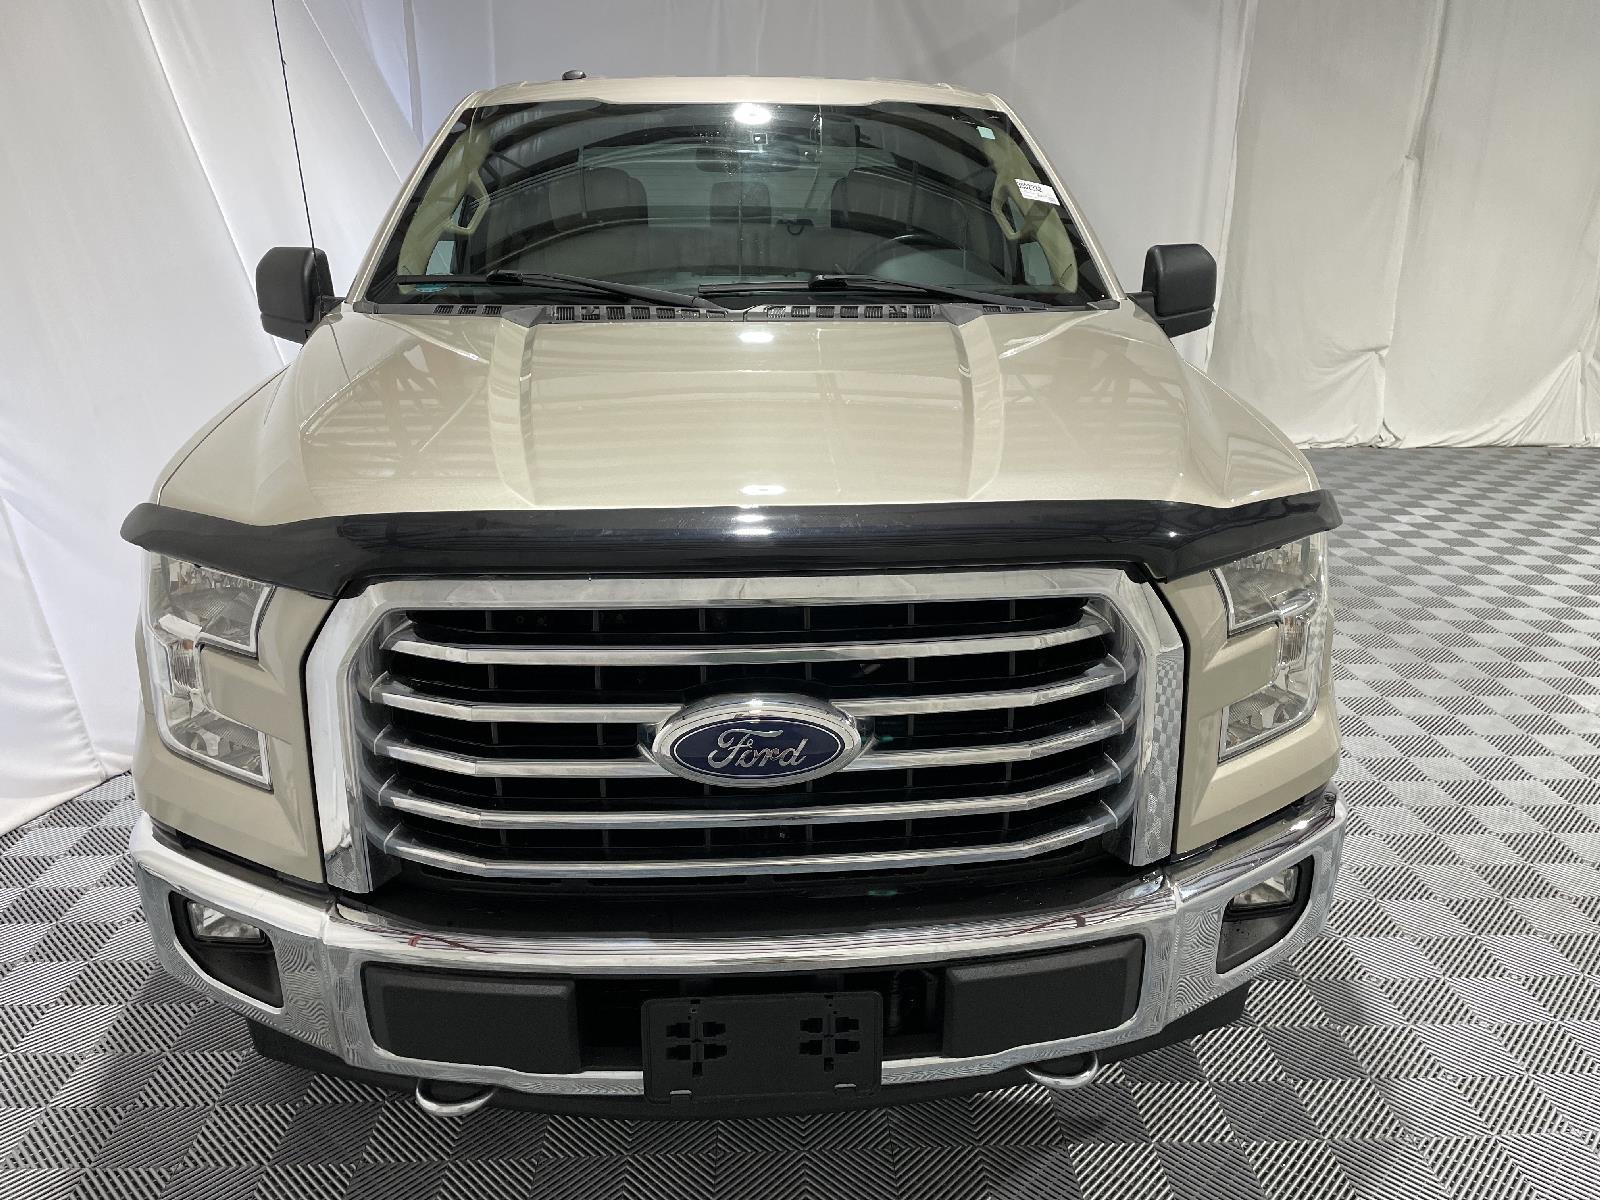 Used 2017 Ford F-150 XLT Crew Cab Truck for sale in St Joseph MO